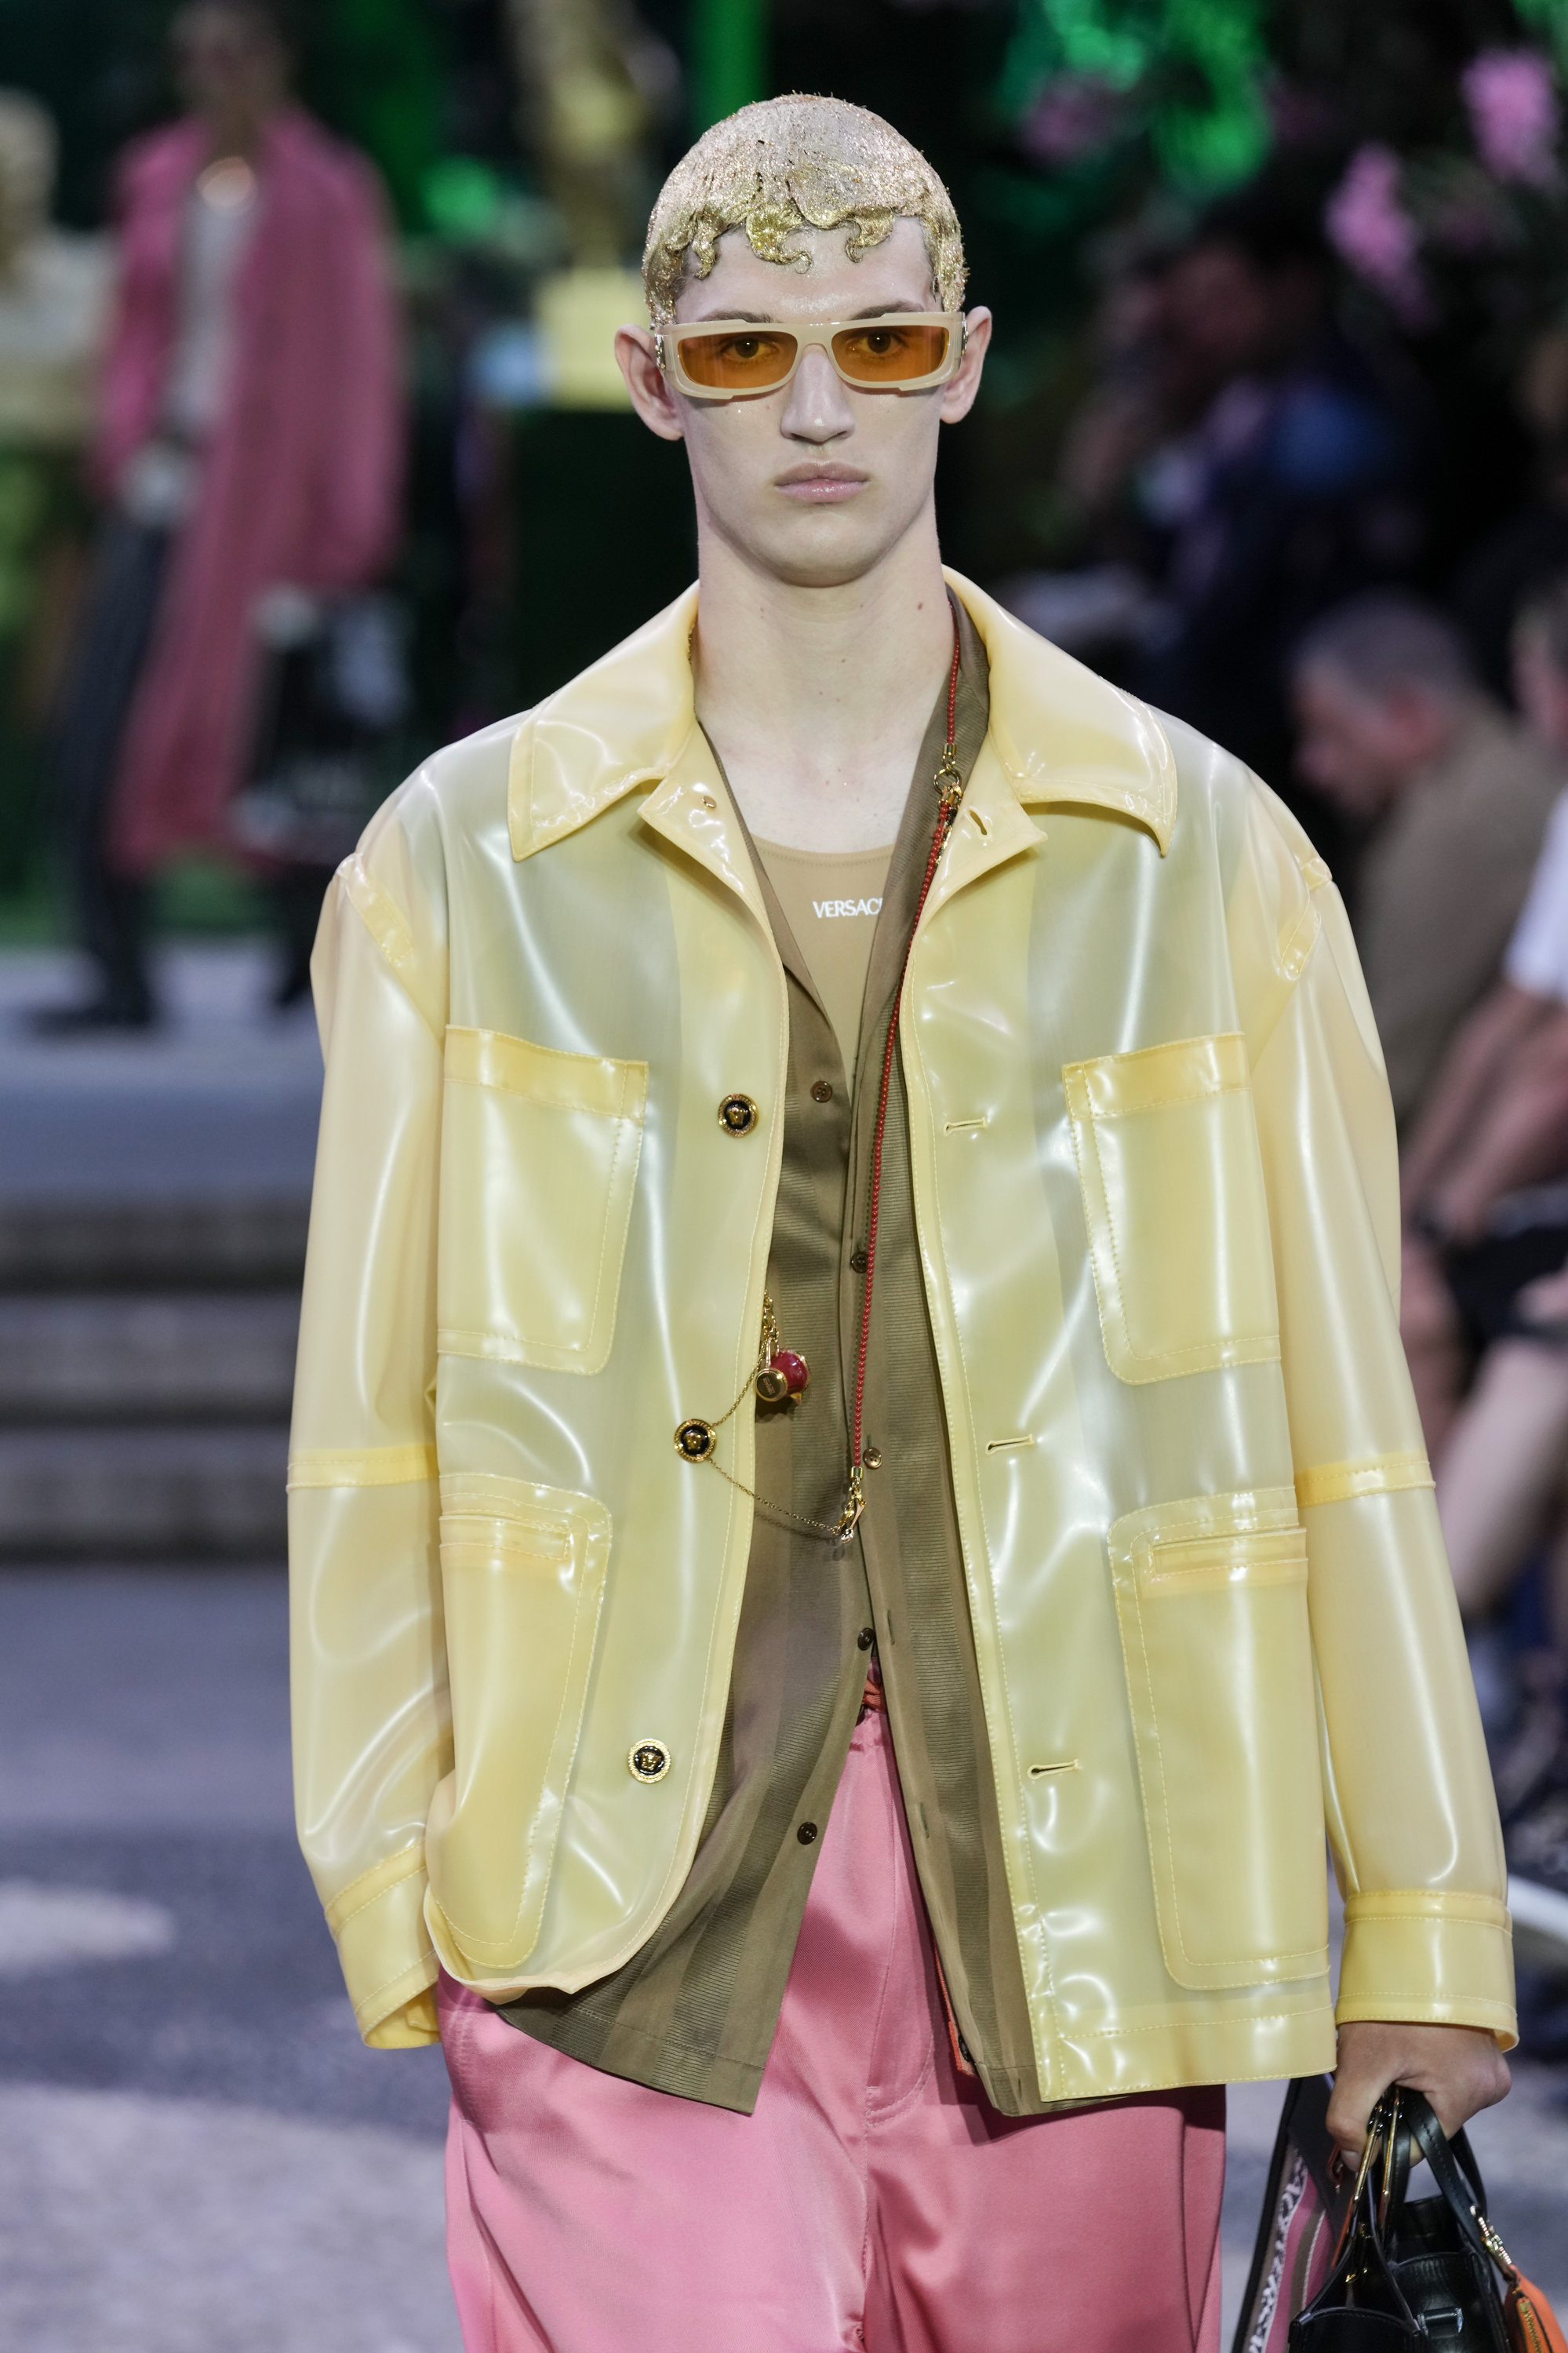 Milan Men’s Fashion Week: Versace invoked pop Baroque style with a ...